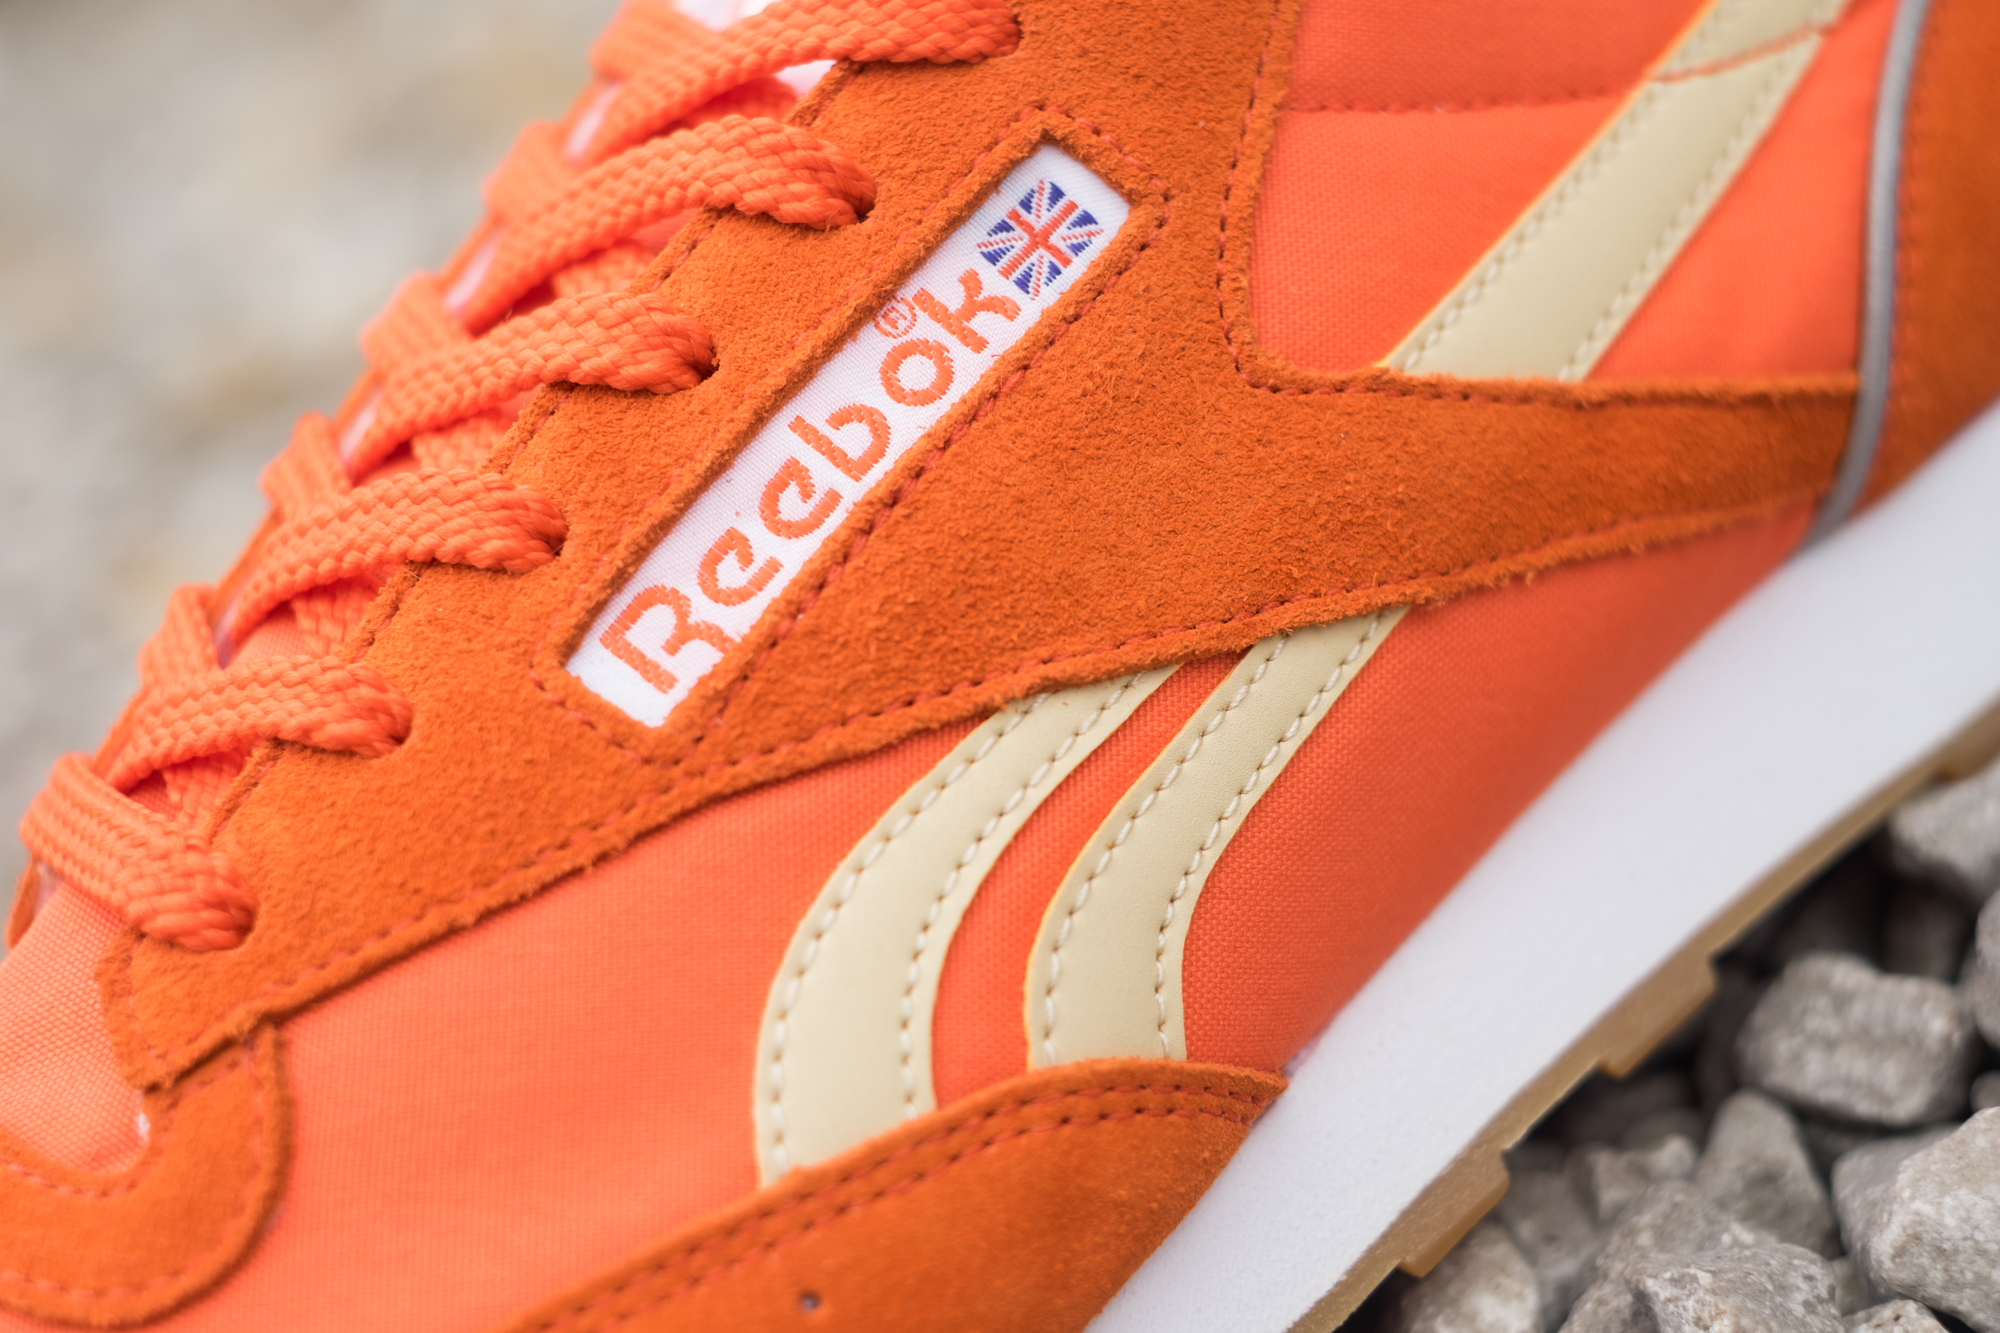 The Reebok Classic 83 Ree-Cut is a size 